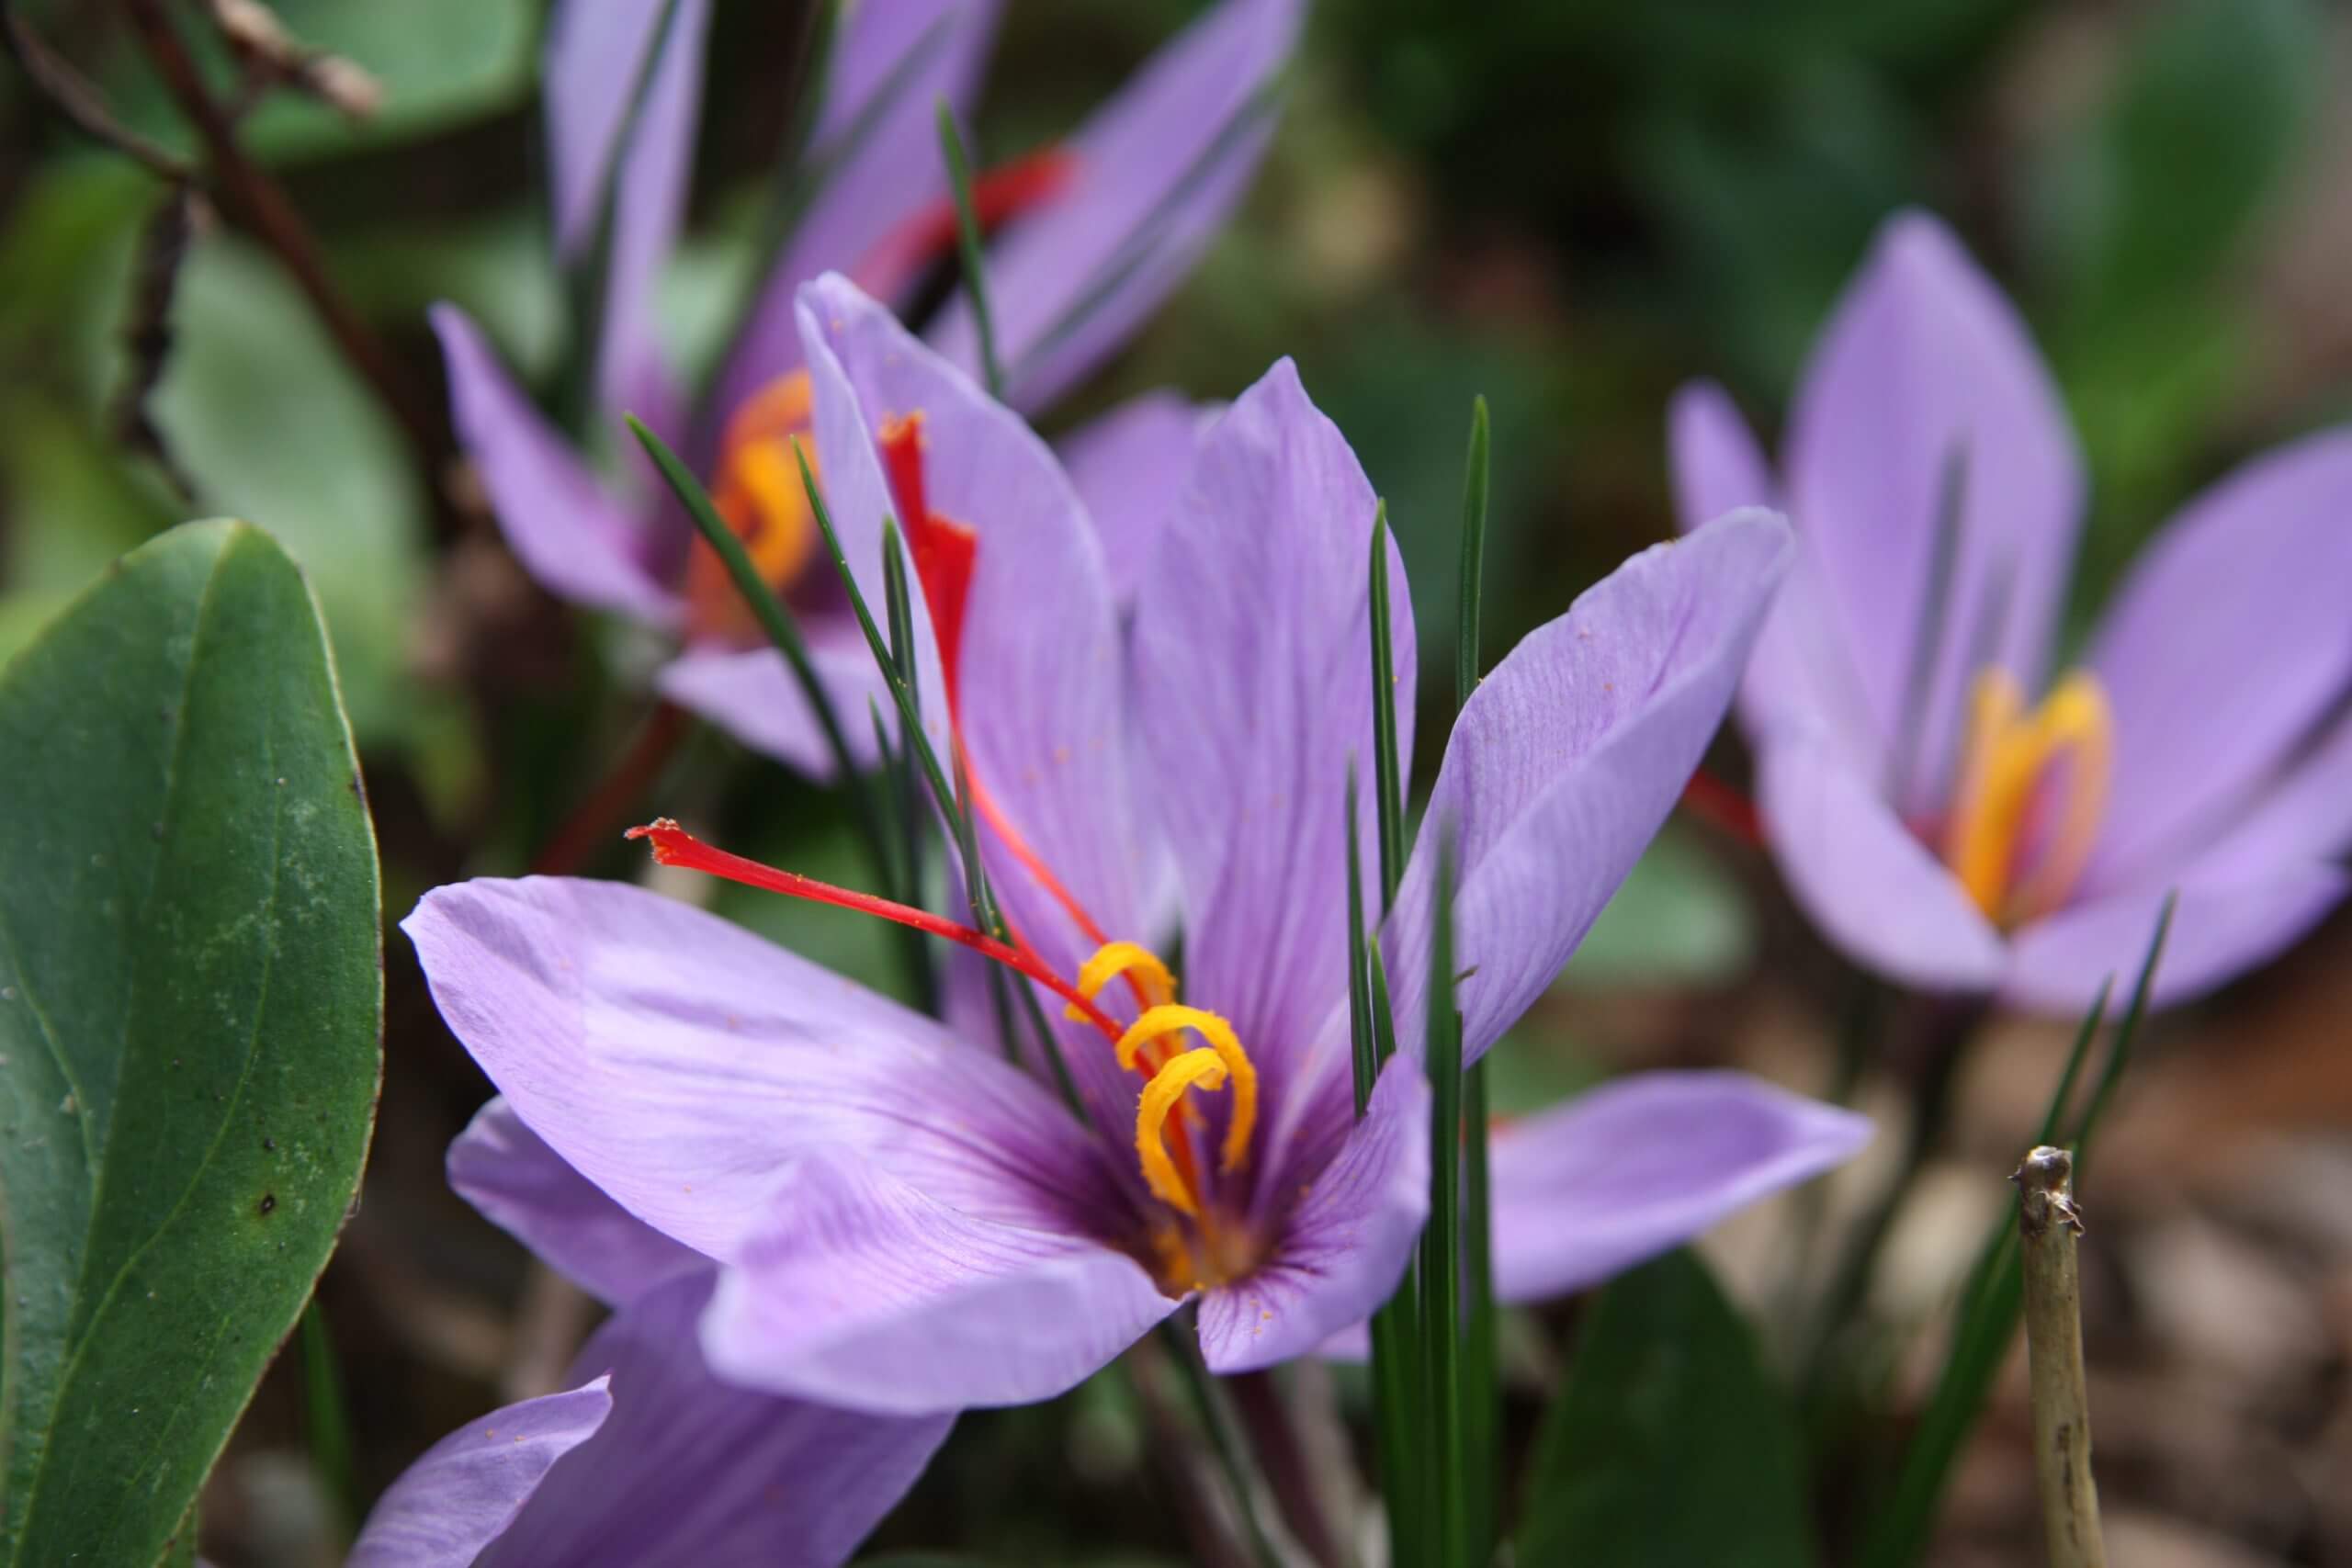 The saffron crocus is a fall bloomer that yields one of the most expensive spices on Earth.